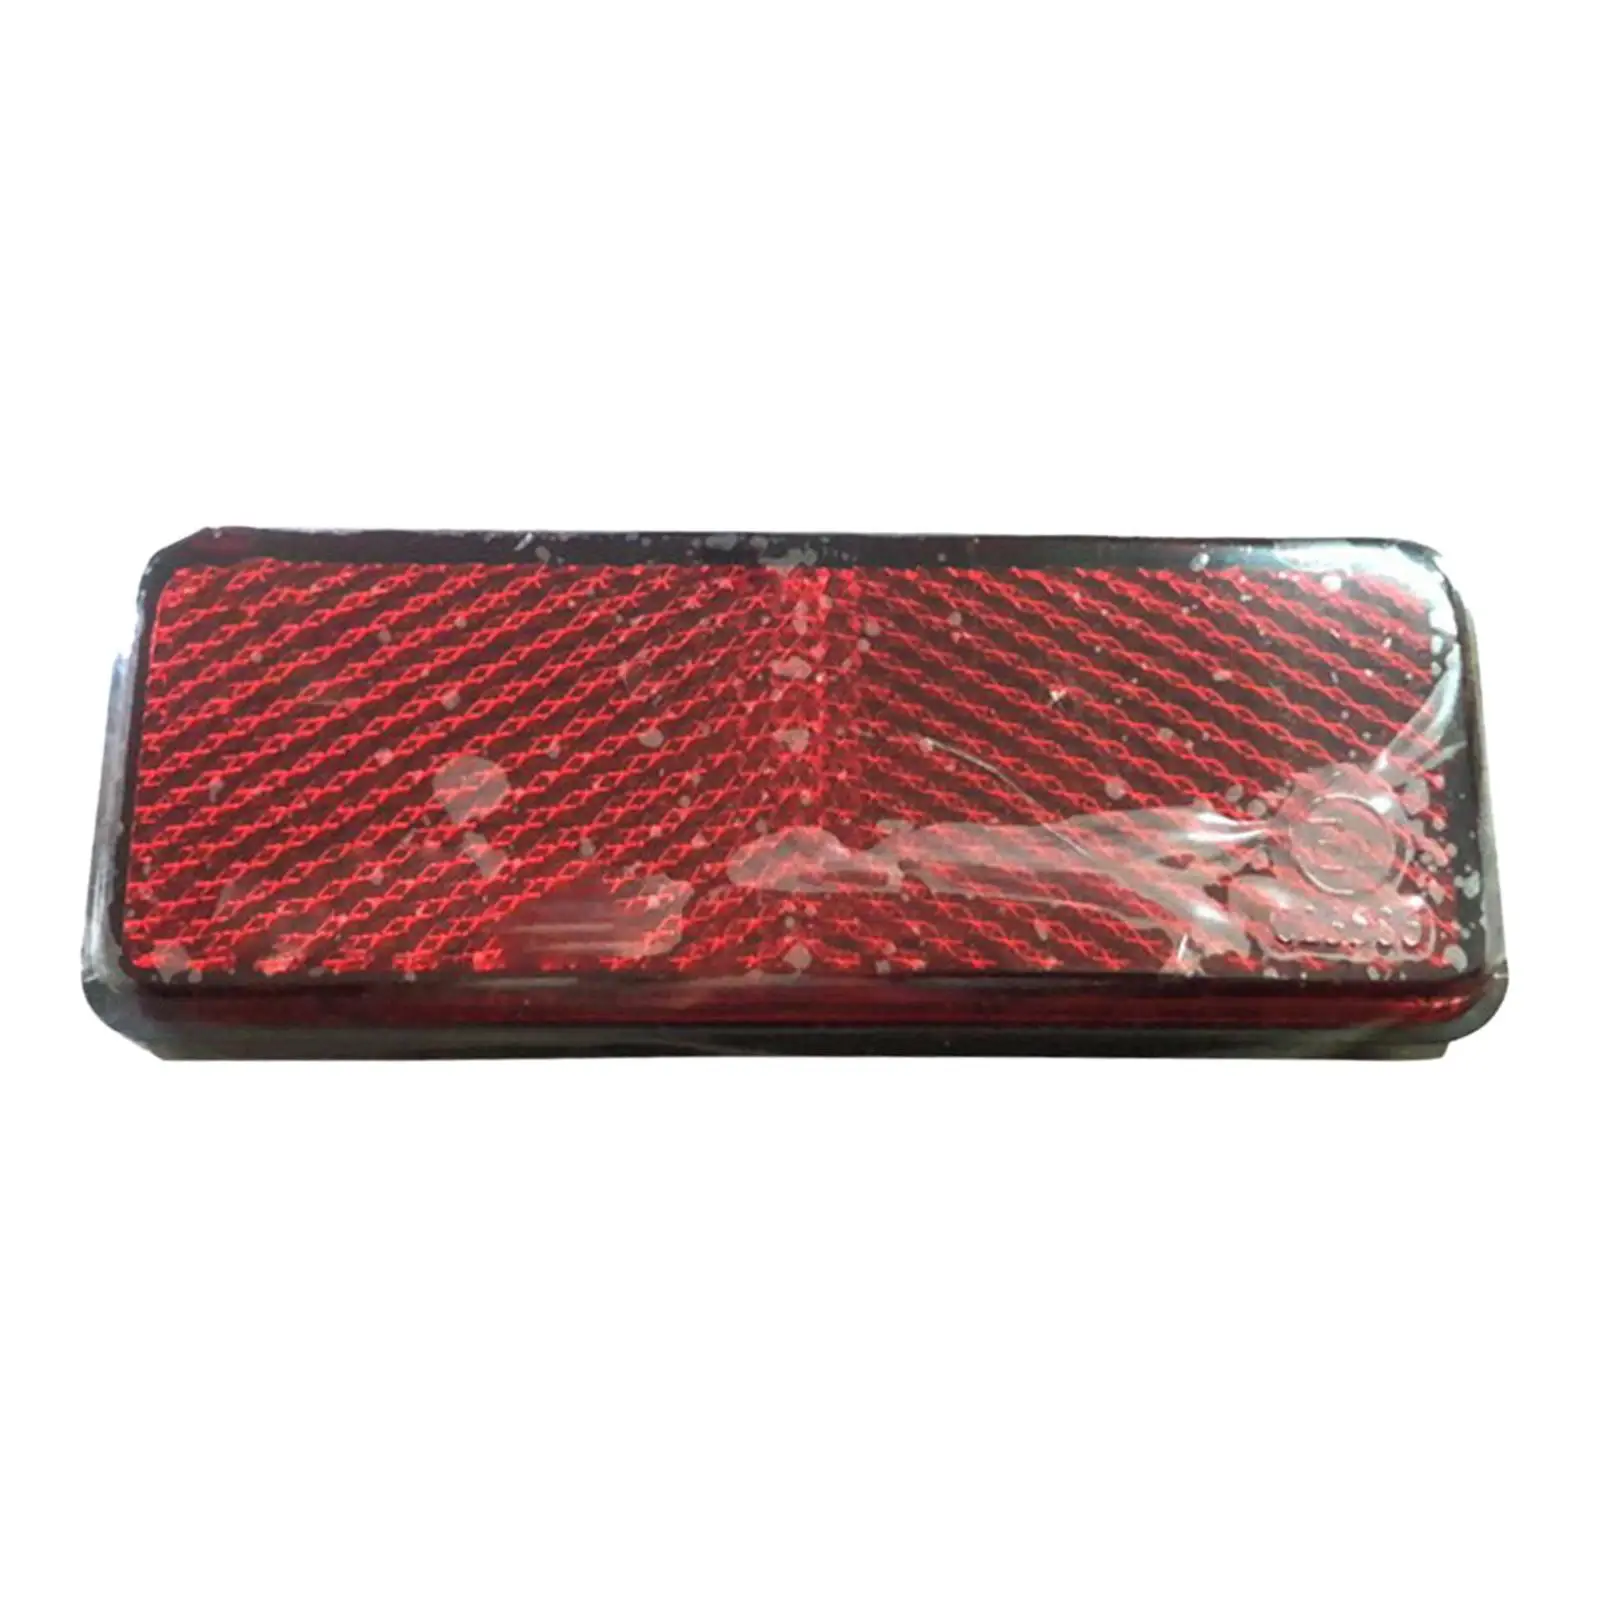 Universal Motorcycle Rear Reflector Replacement High Quality for Bicycle Trucks